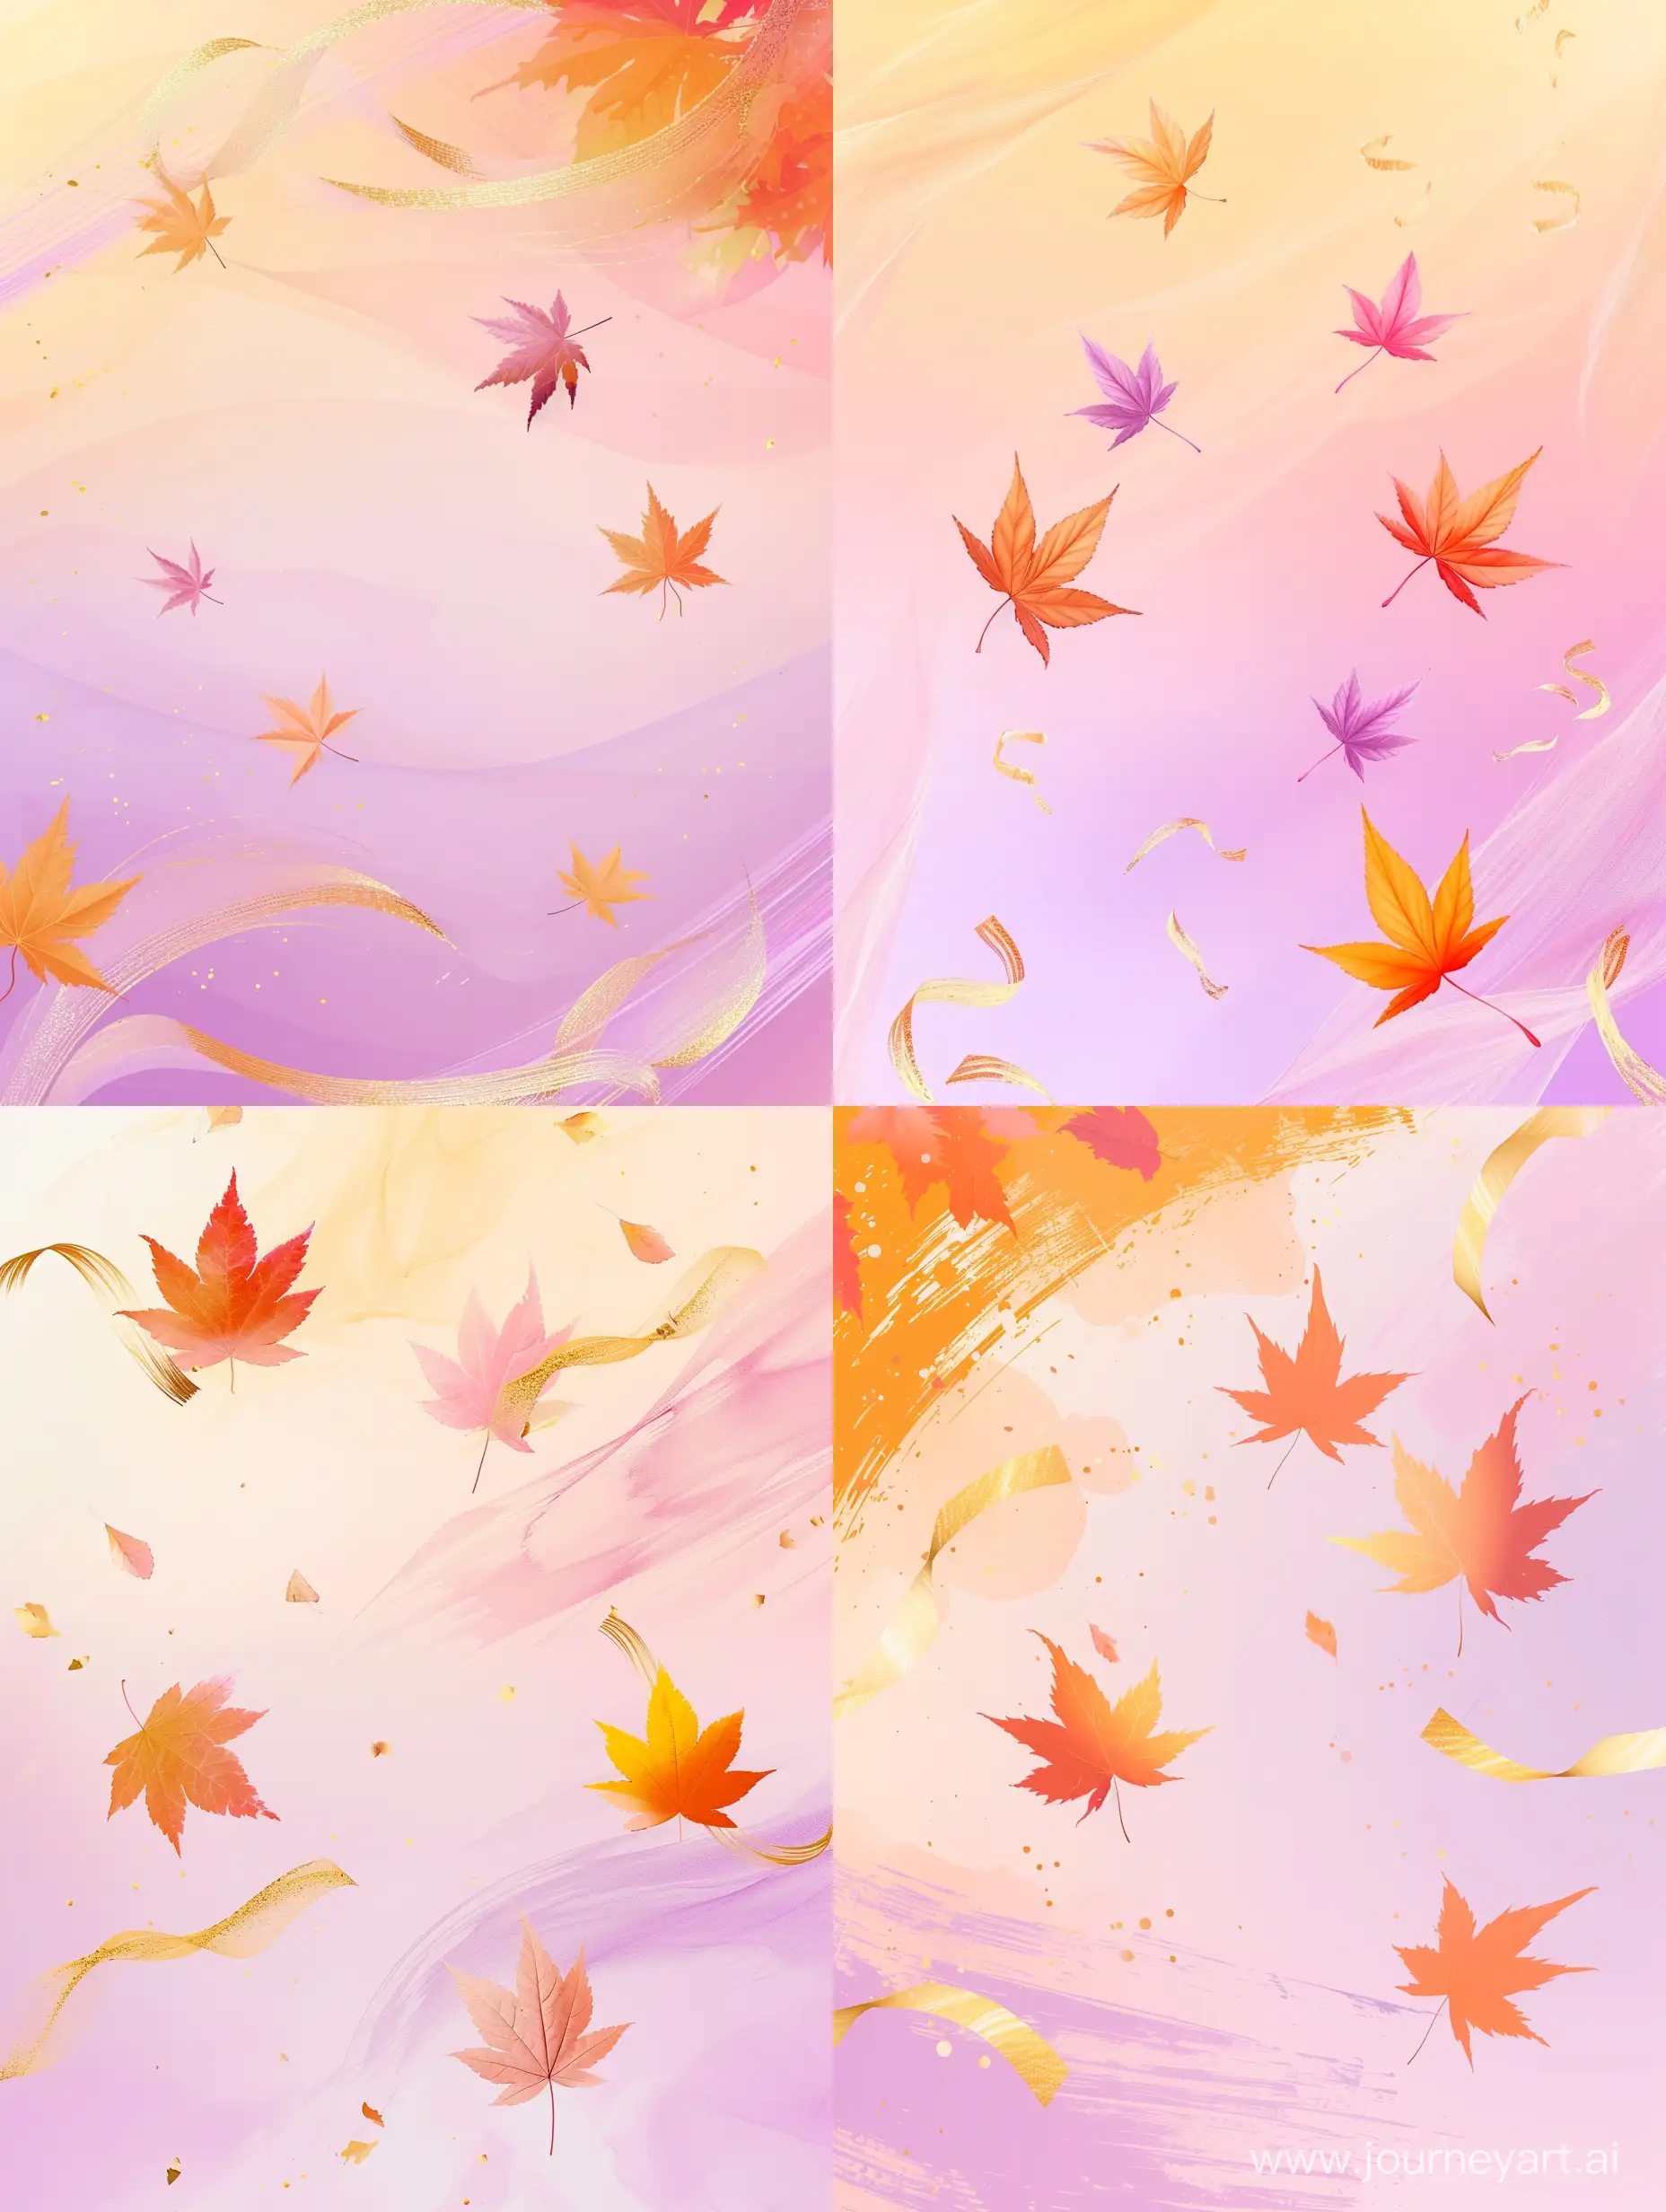 Elegant-Maple-Leaves-and-Golden-Ribbons-on-Pink-Lilac-Background